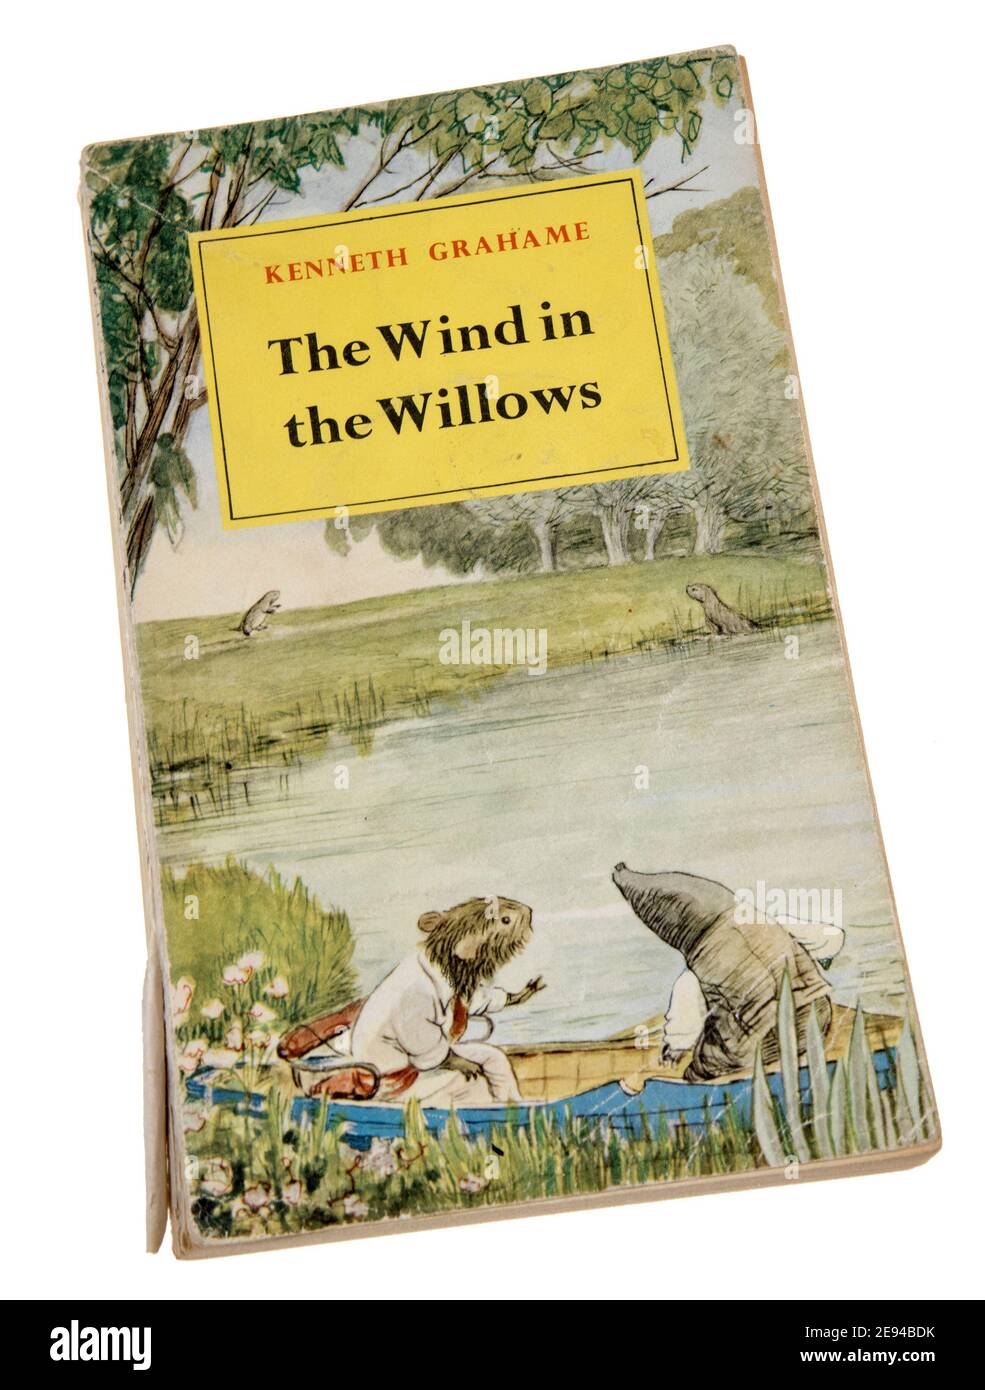 The Wind in the Willows by Kenneth Graham first published in 1908 Stock Photo